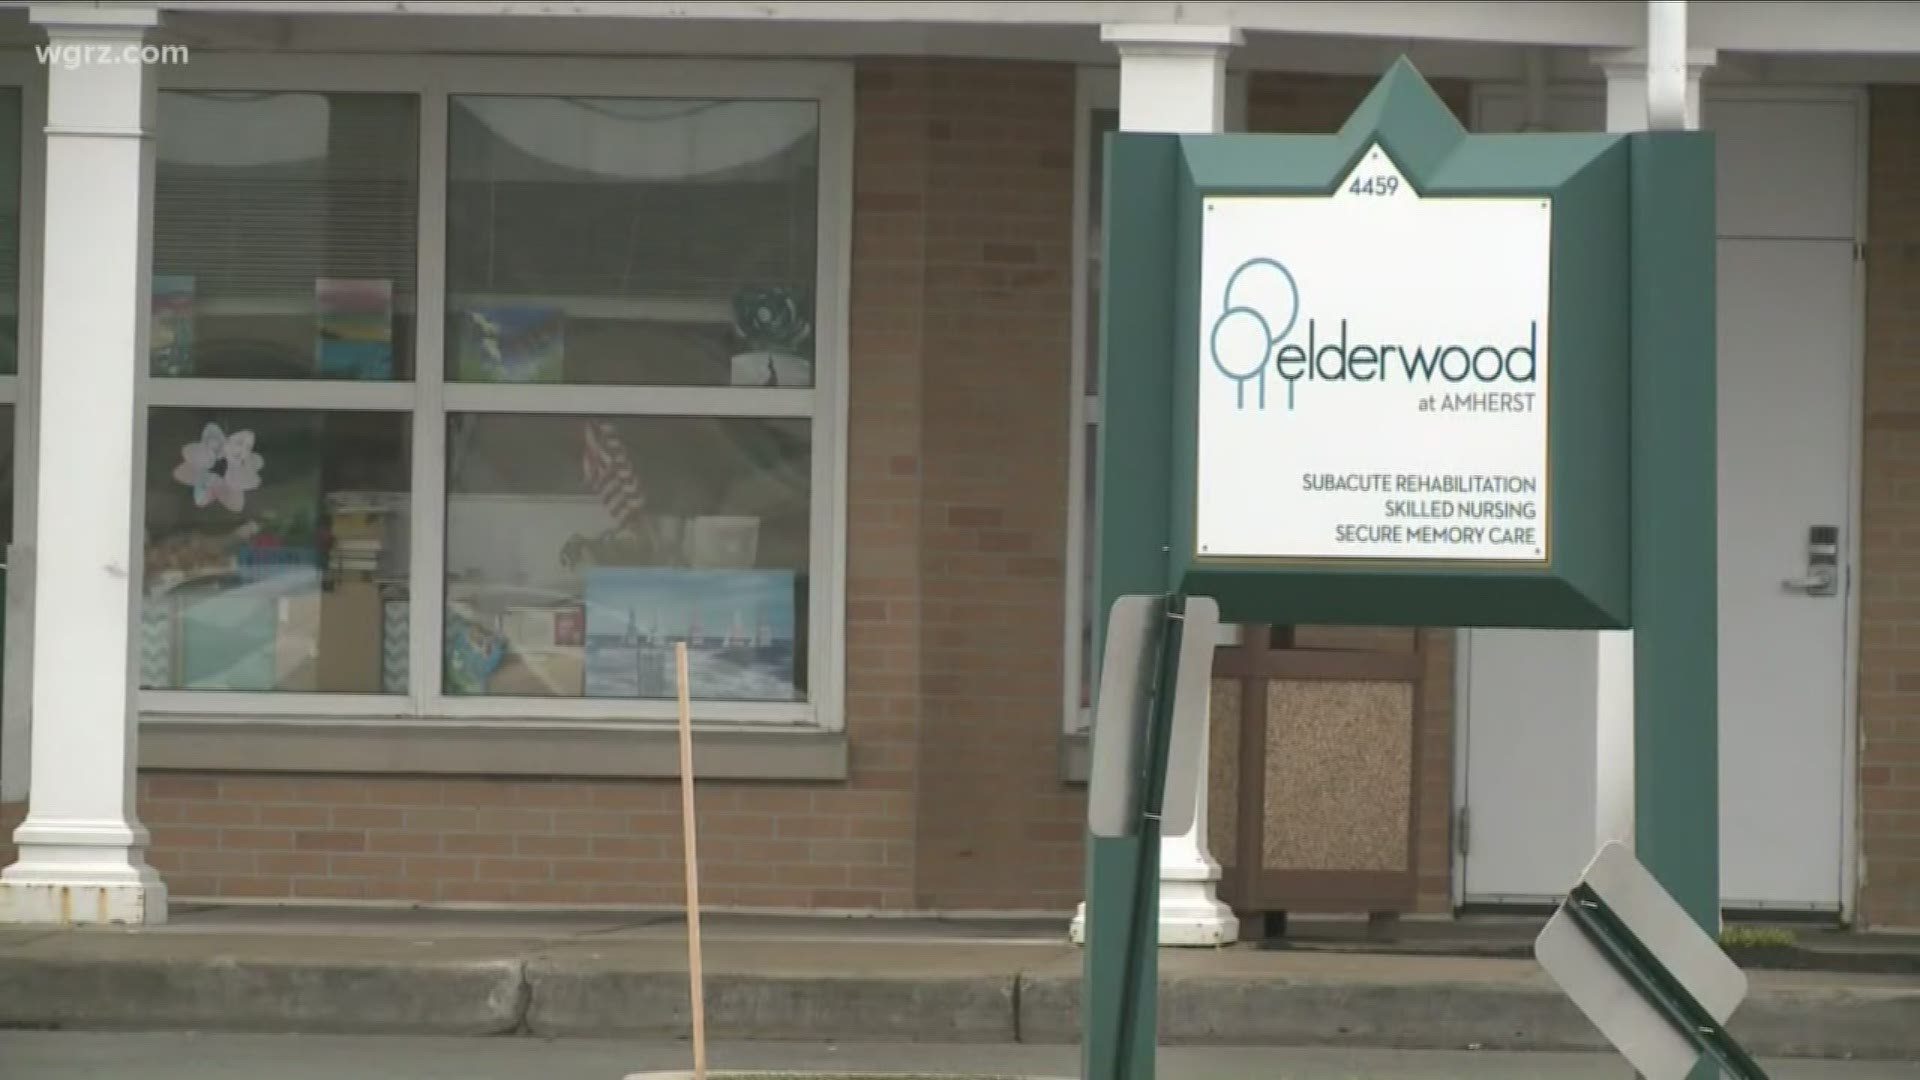 Elderwood has opted to put this special isolated post acute care unit at its Amherst location as they try to get ahead of the curve.